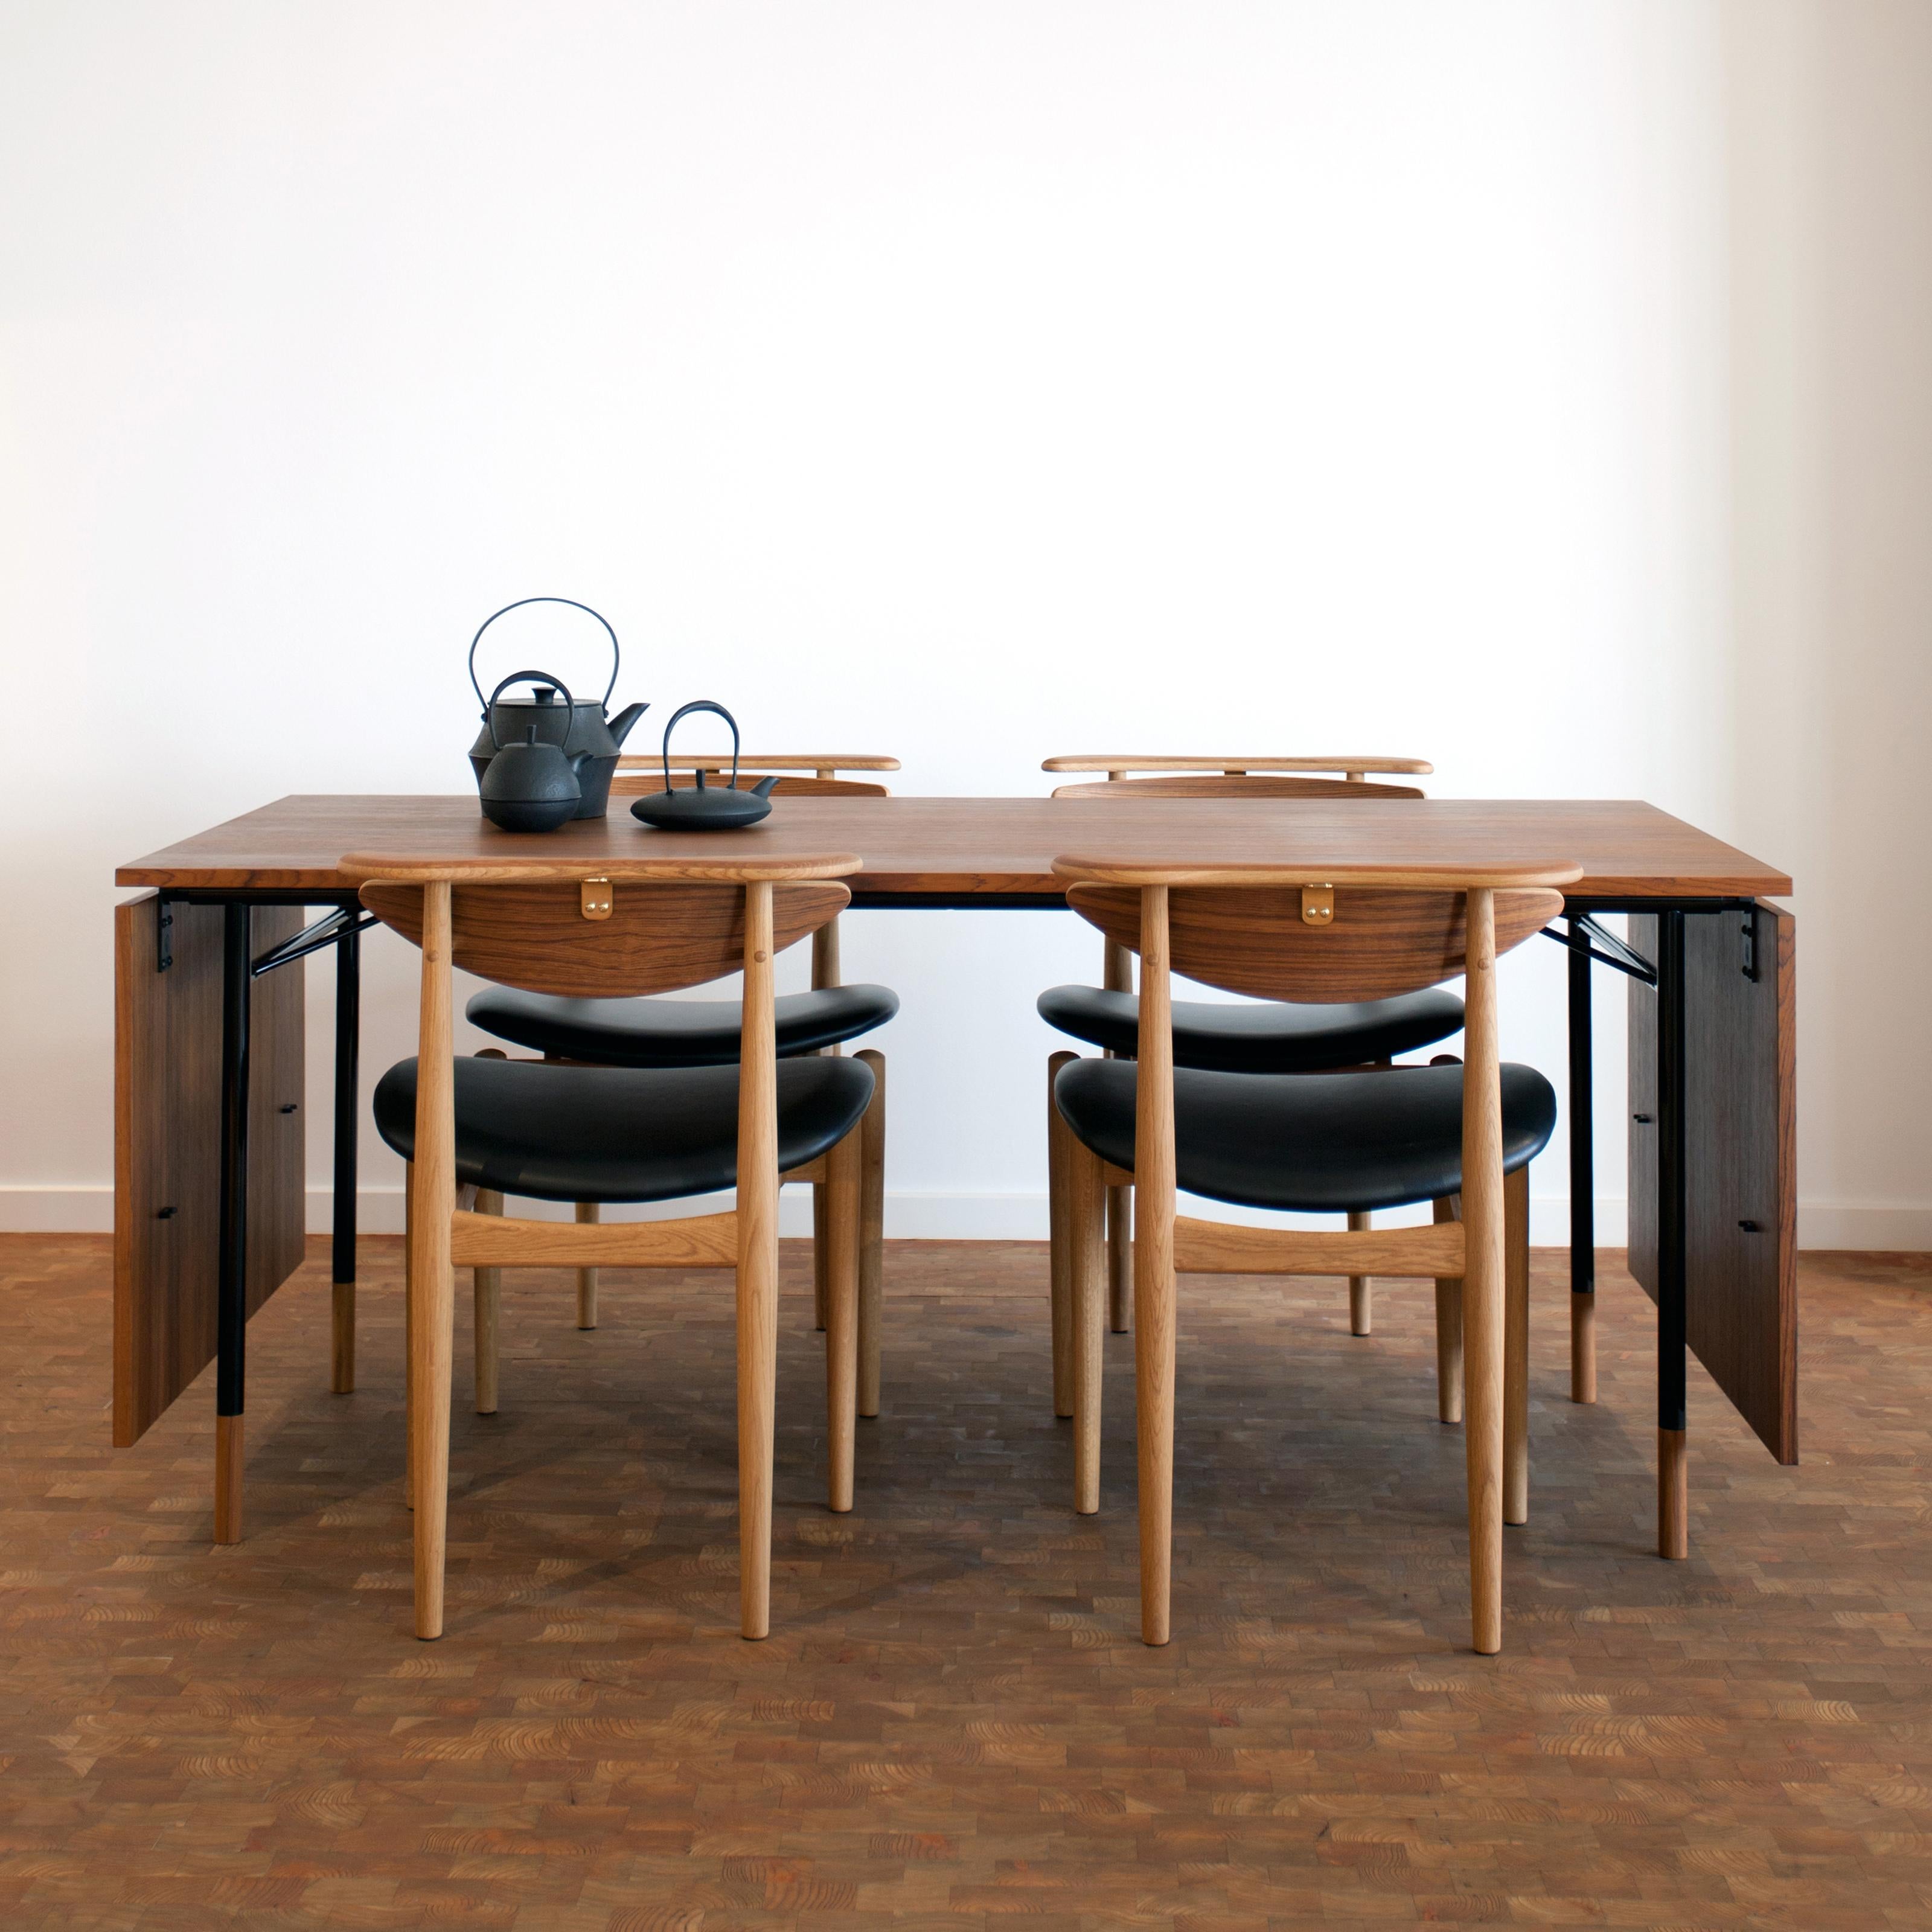 Finn Juhl Nyhavn Dining Table with Two Drop Leaves, Lino and Wood 8